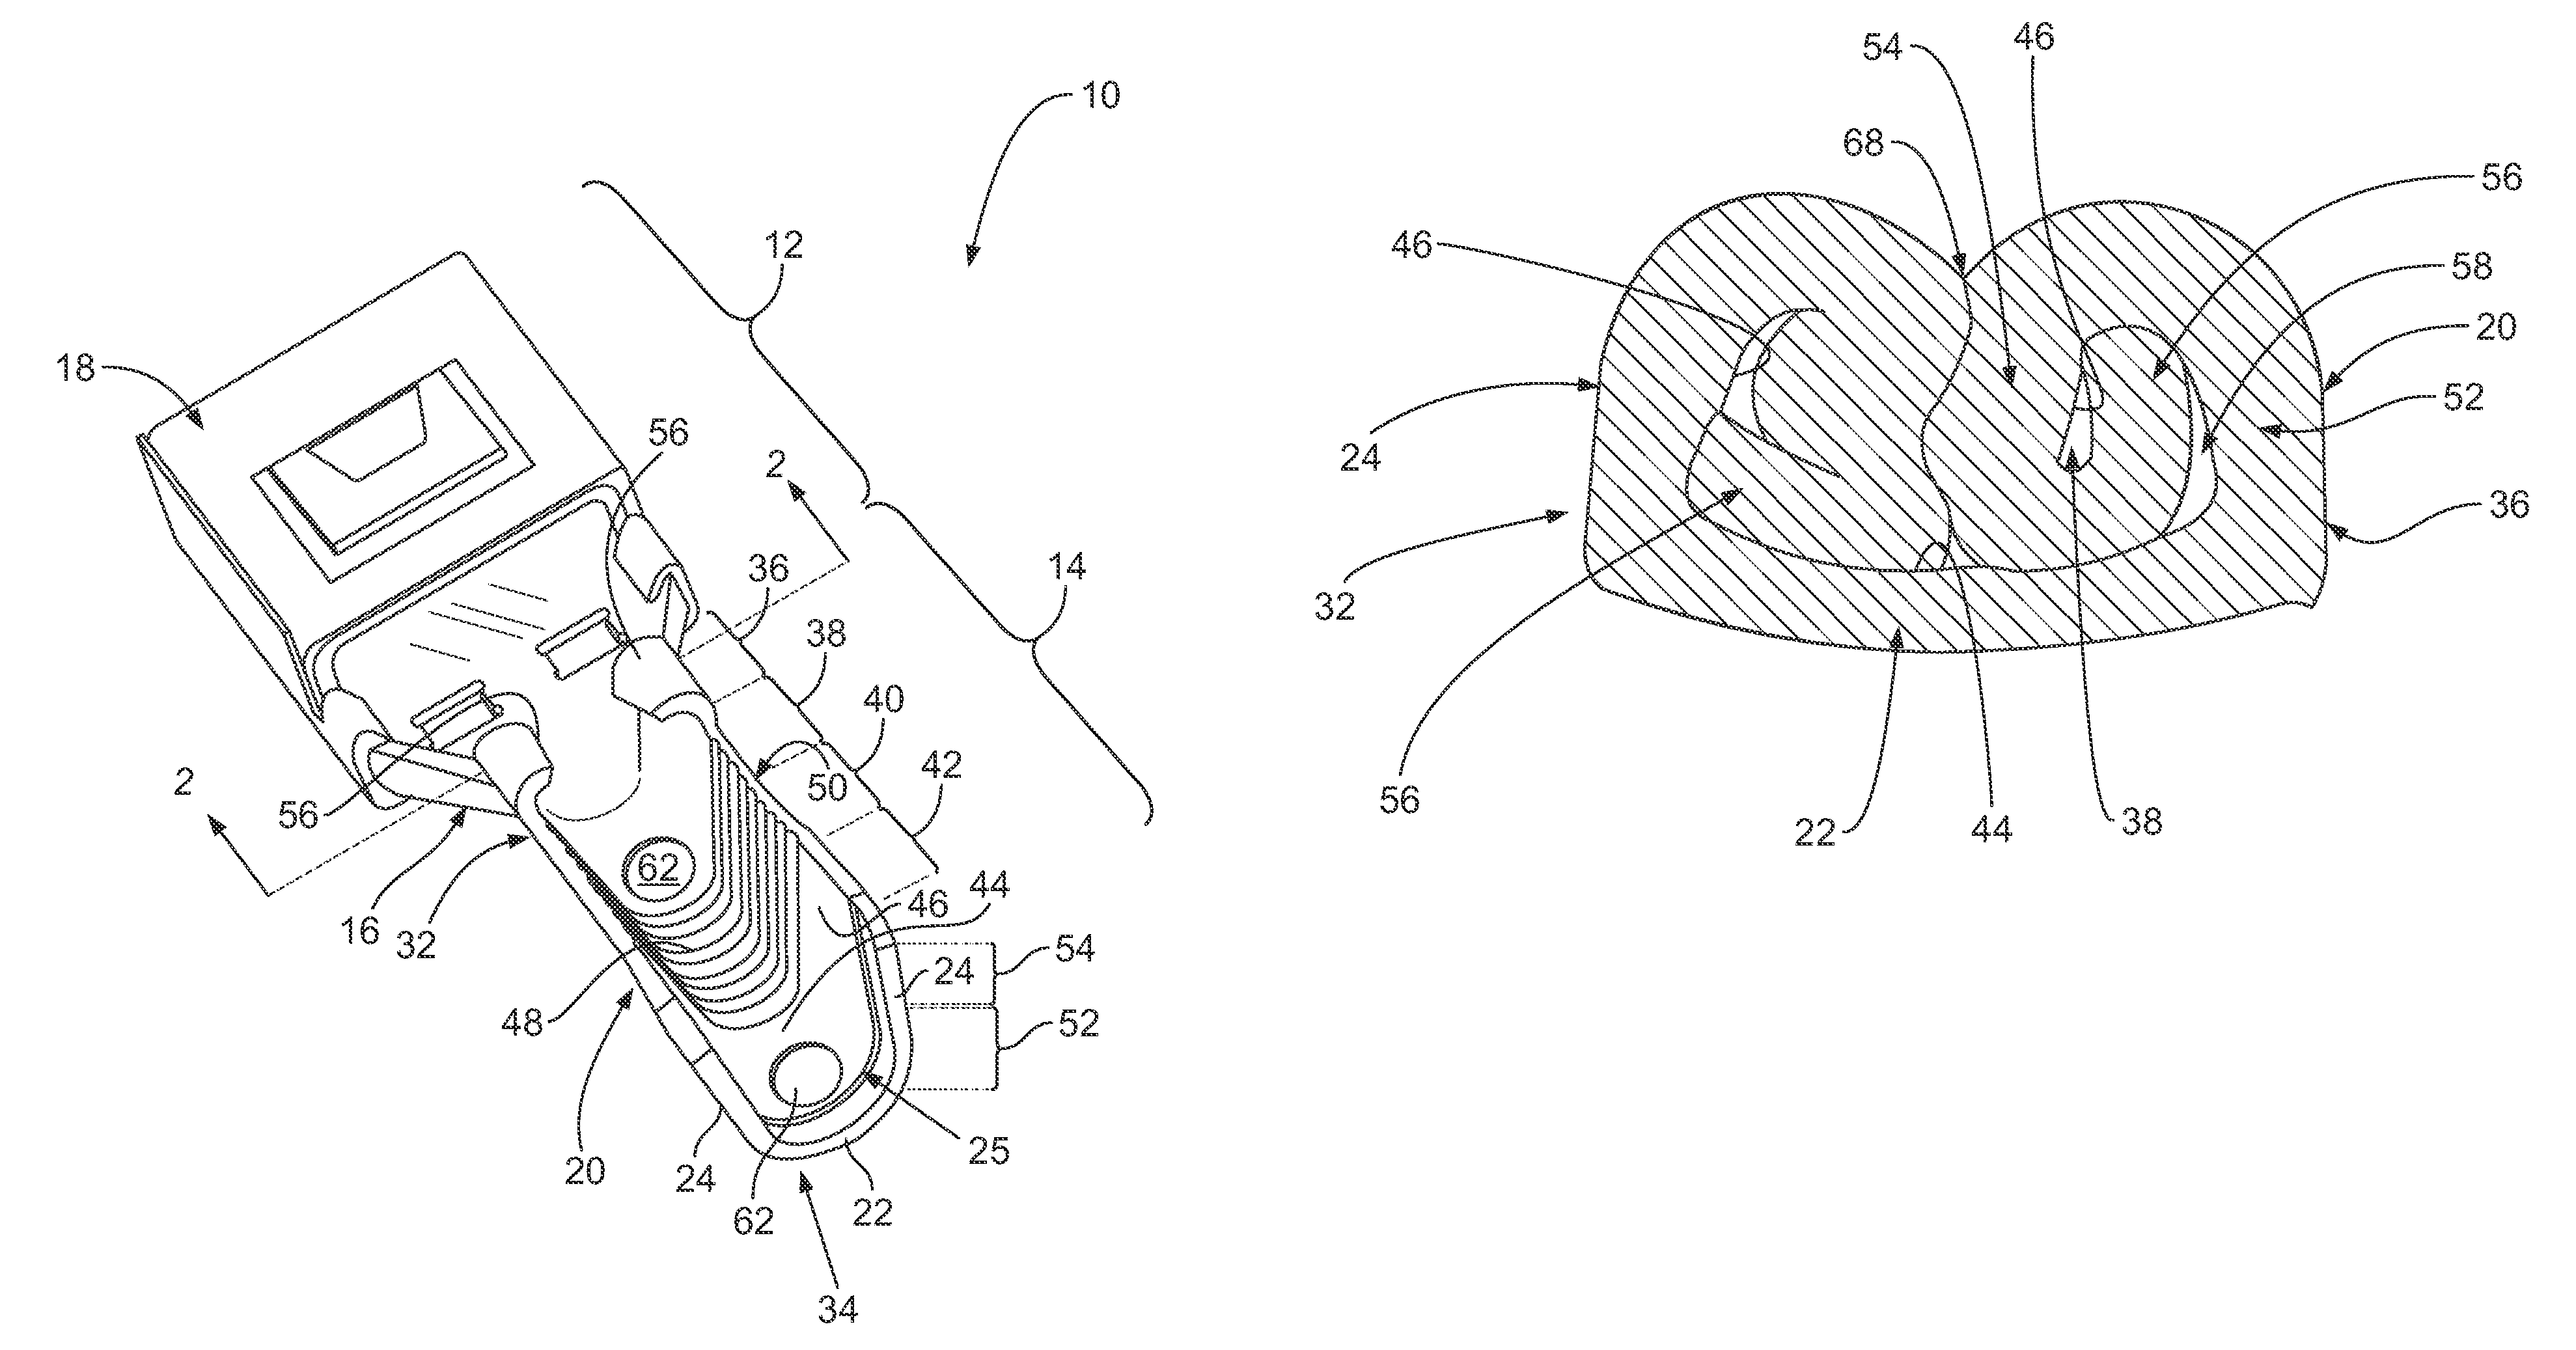 Electrical terminal for terminating a wire